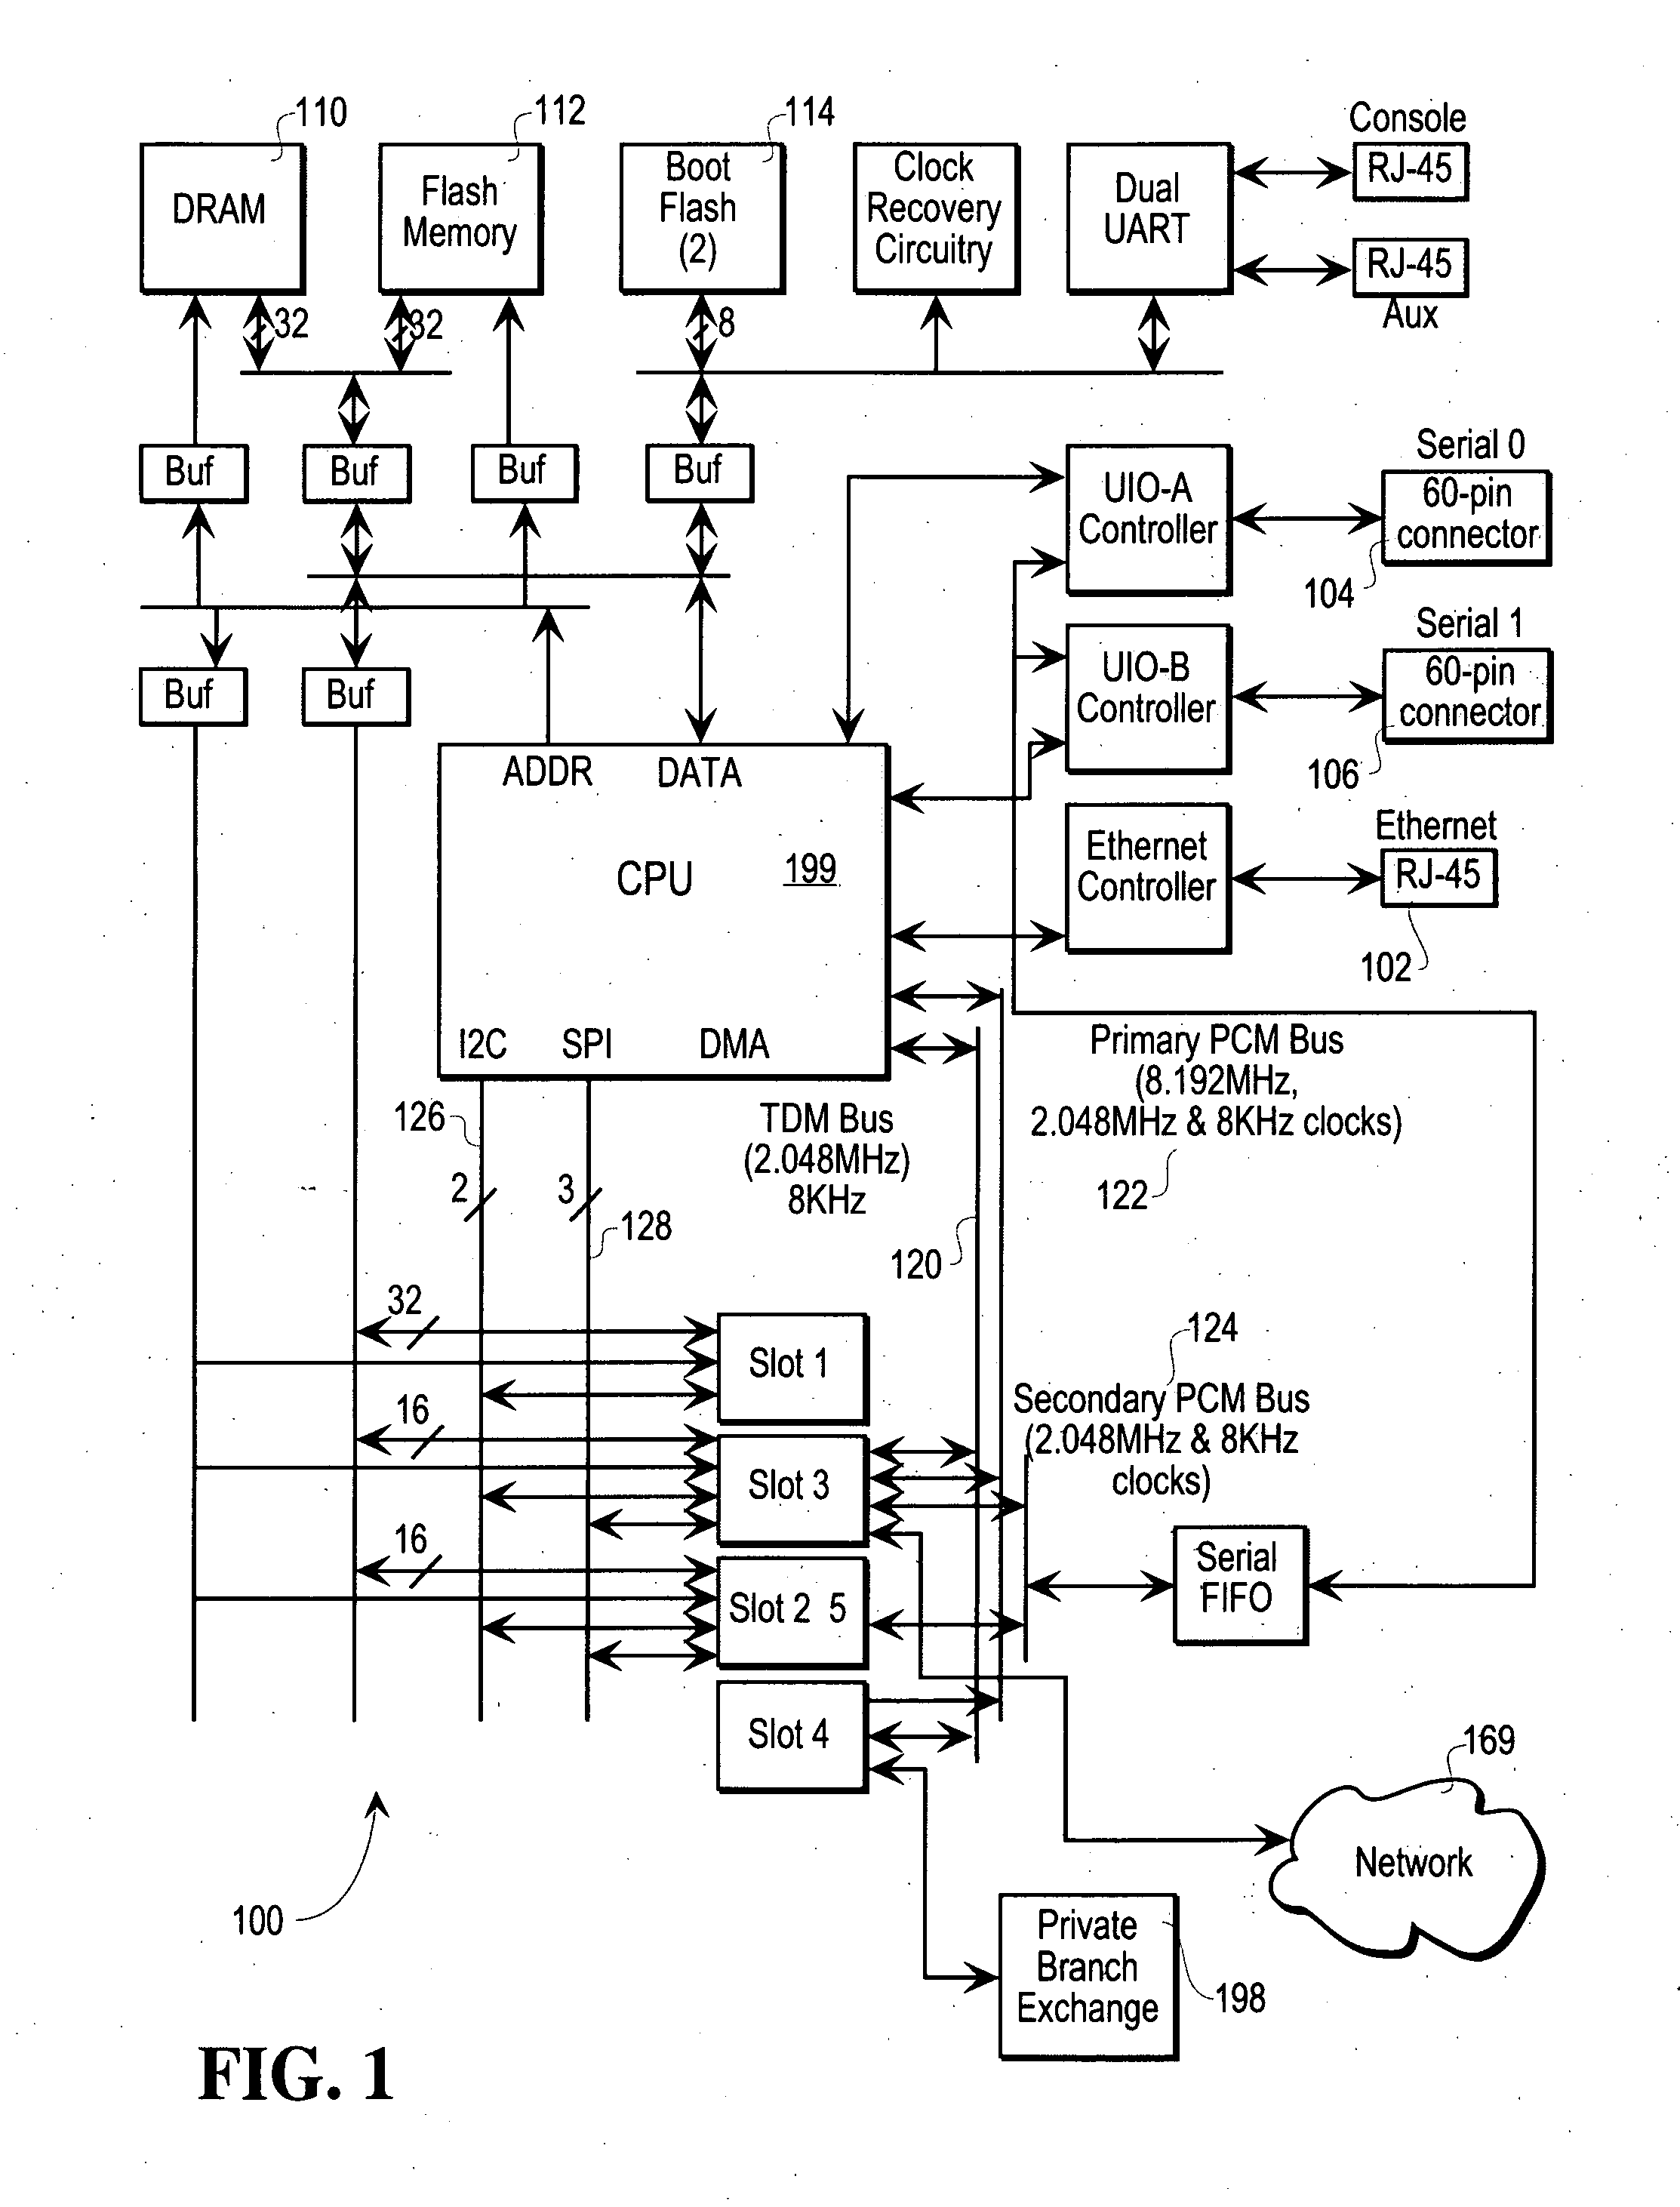 Method and apparatus for providing ringing timeout disconnect supervision in remote telephone extensions using voice over packet-data-network systems (VOPS)